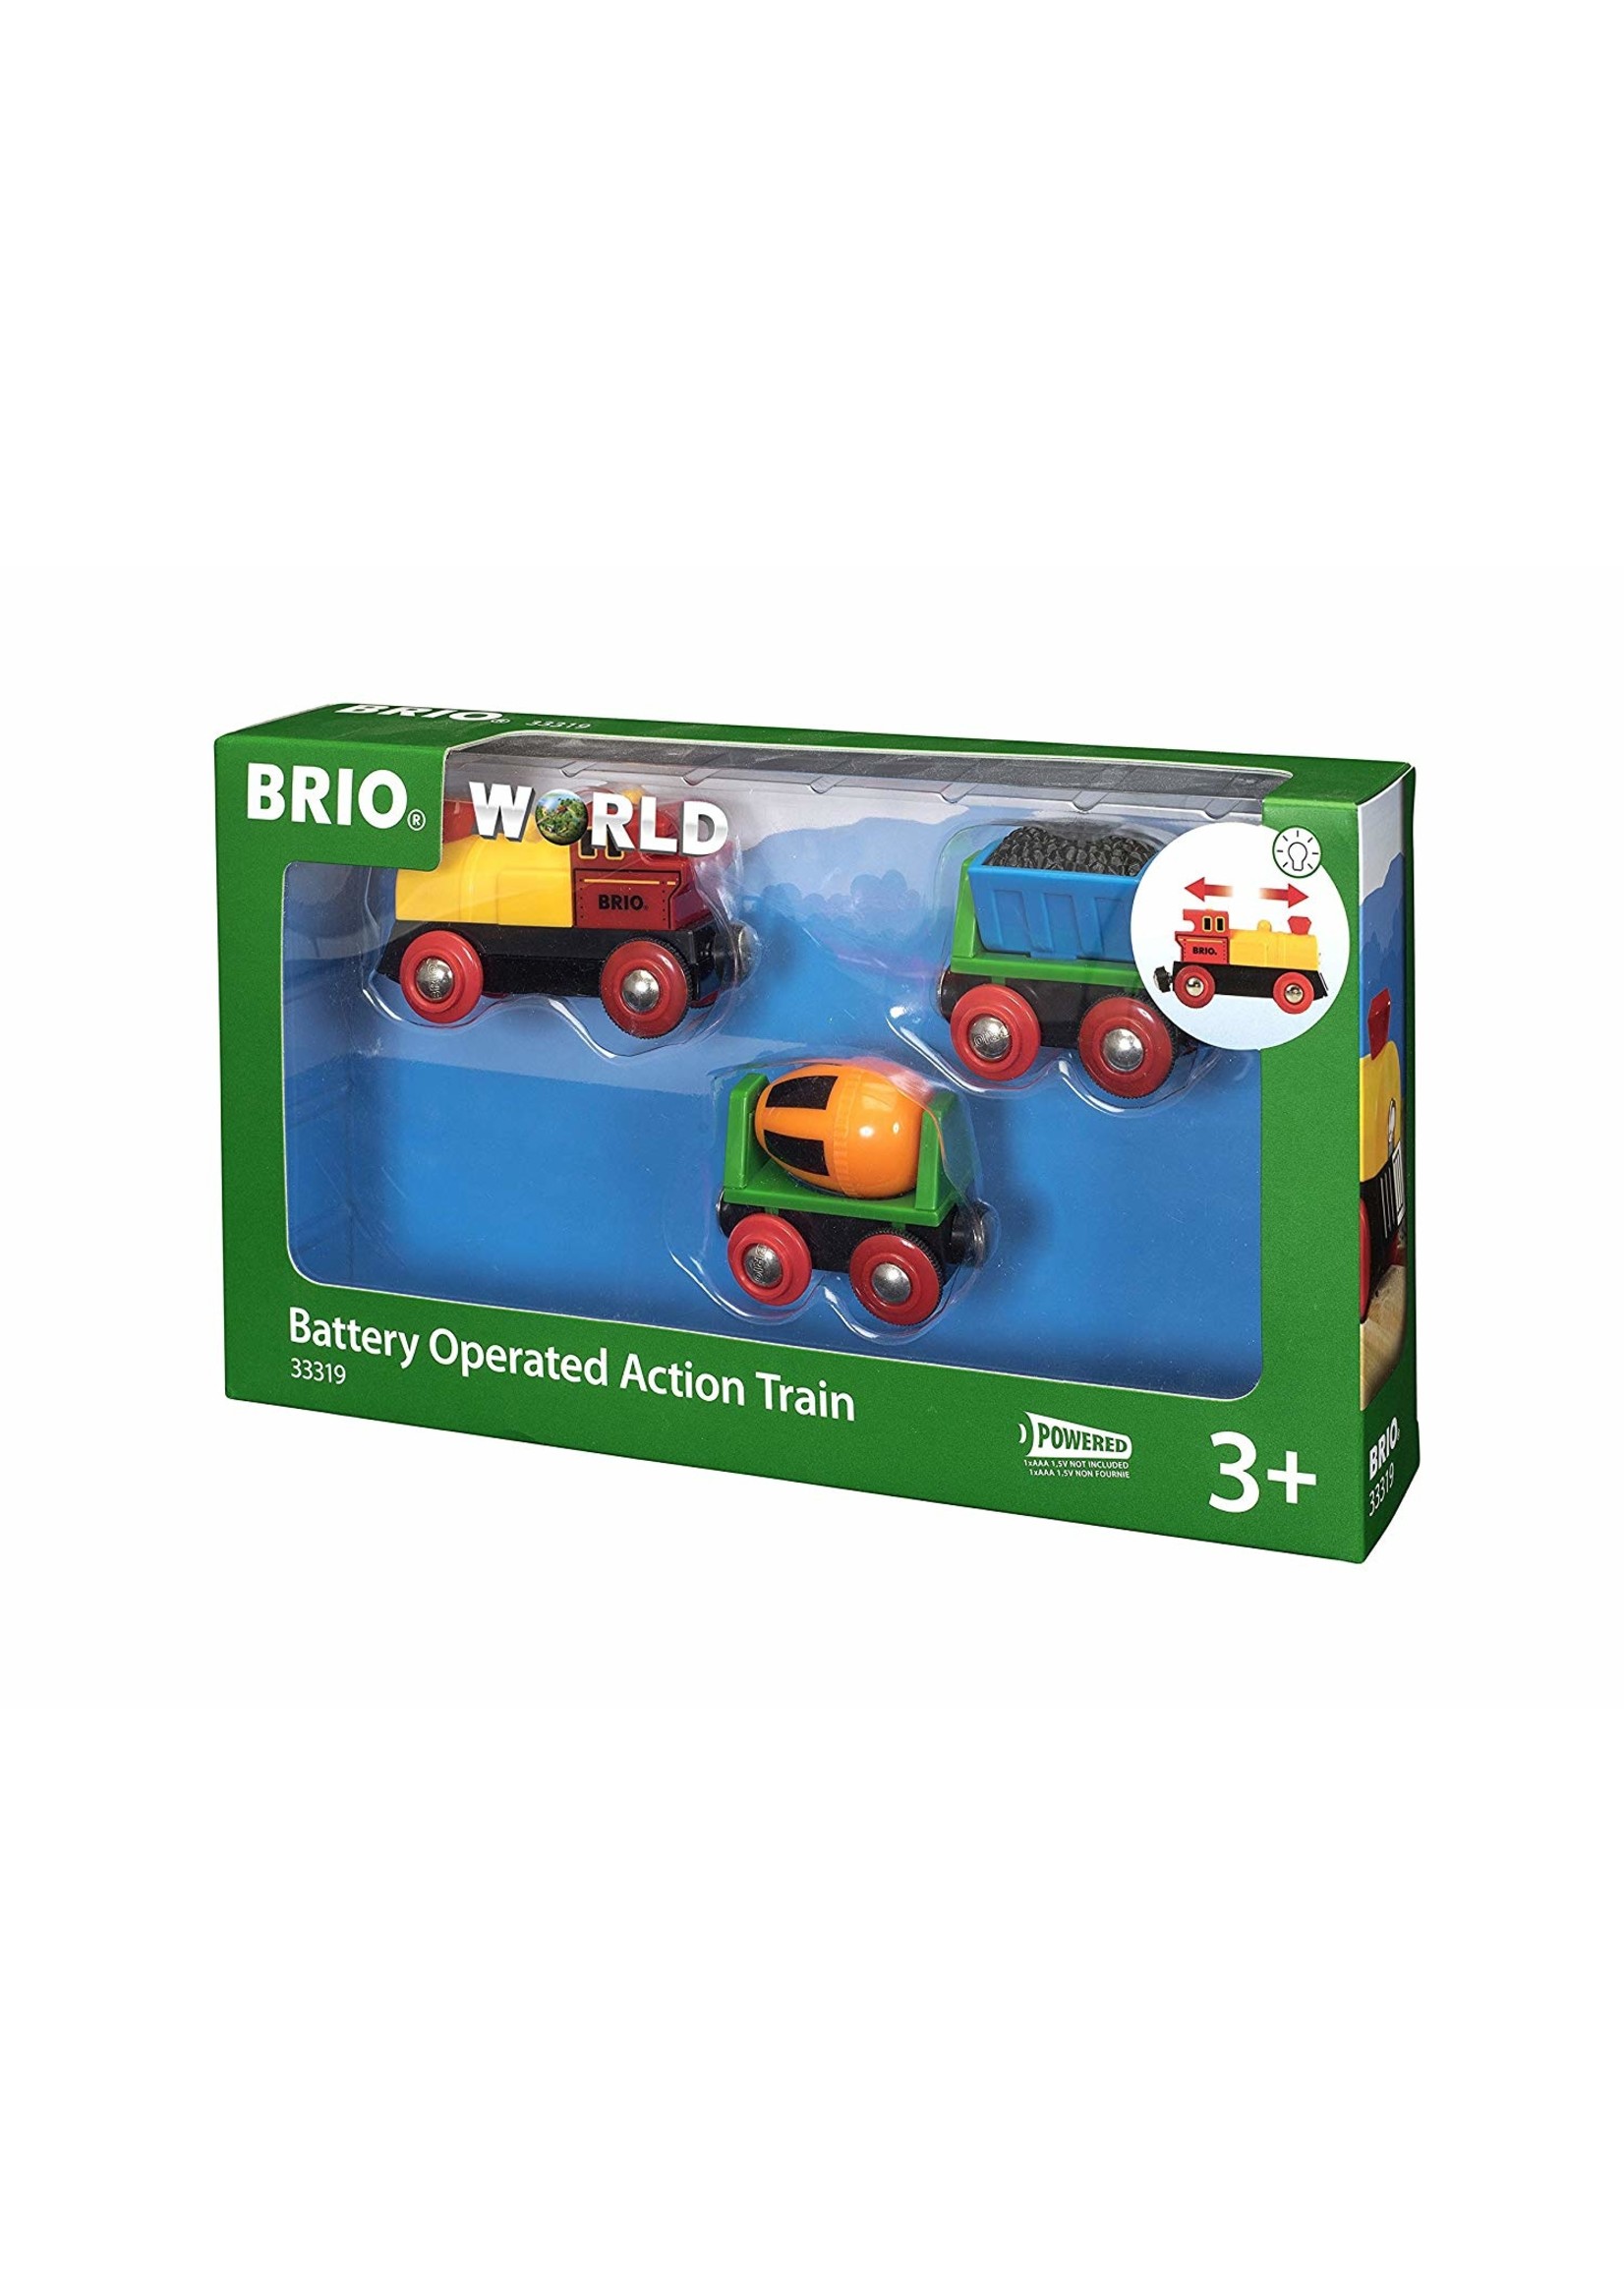 Brio 33319 - Battery Operated Action Train